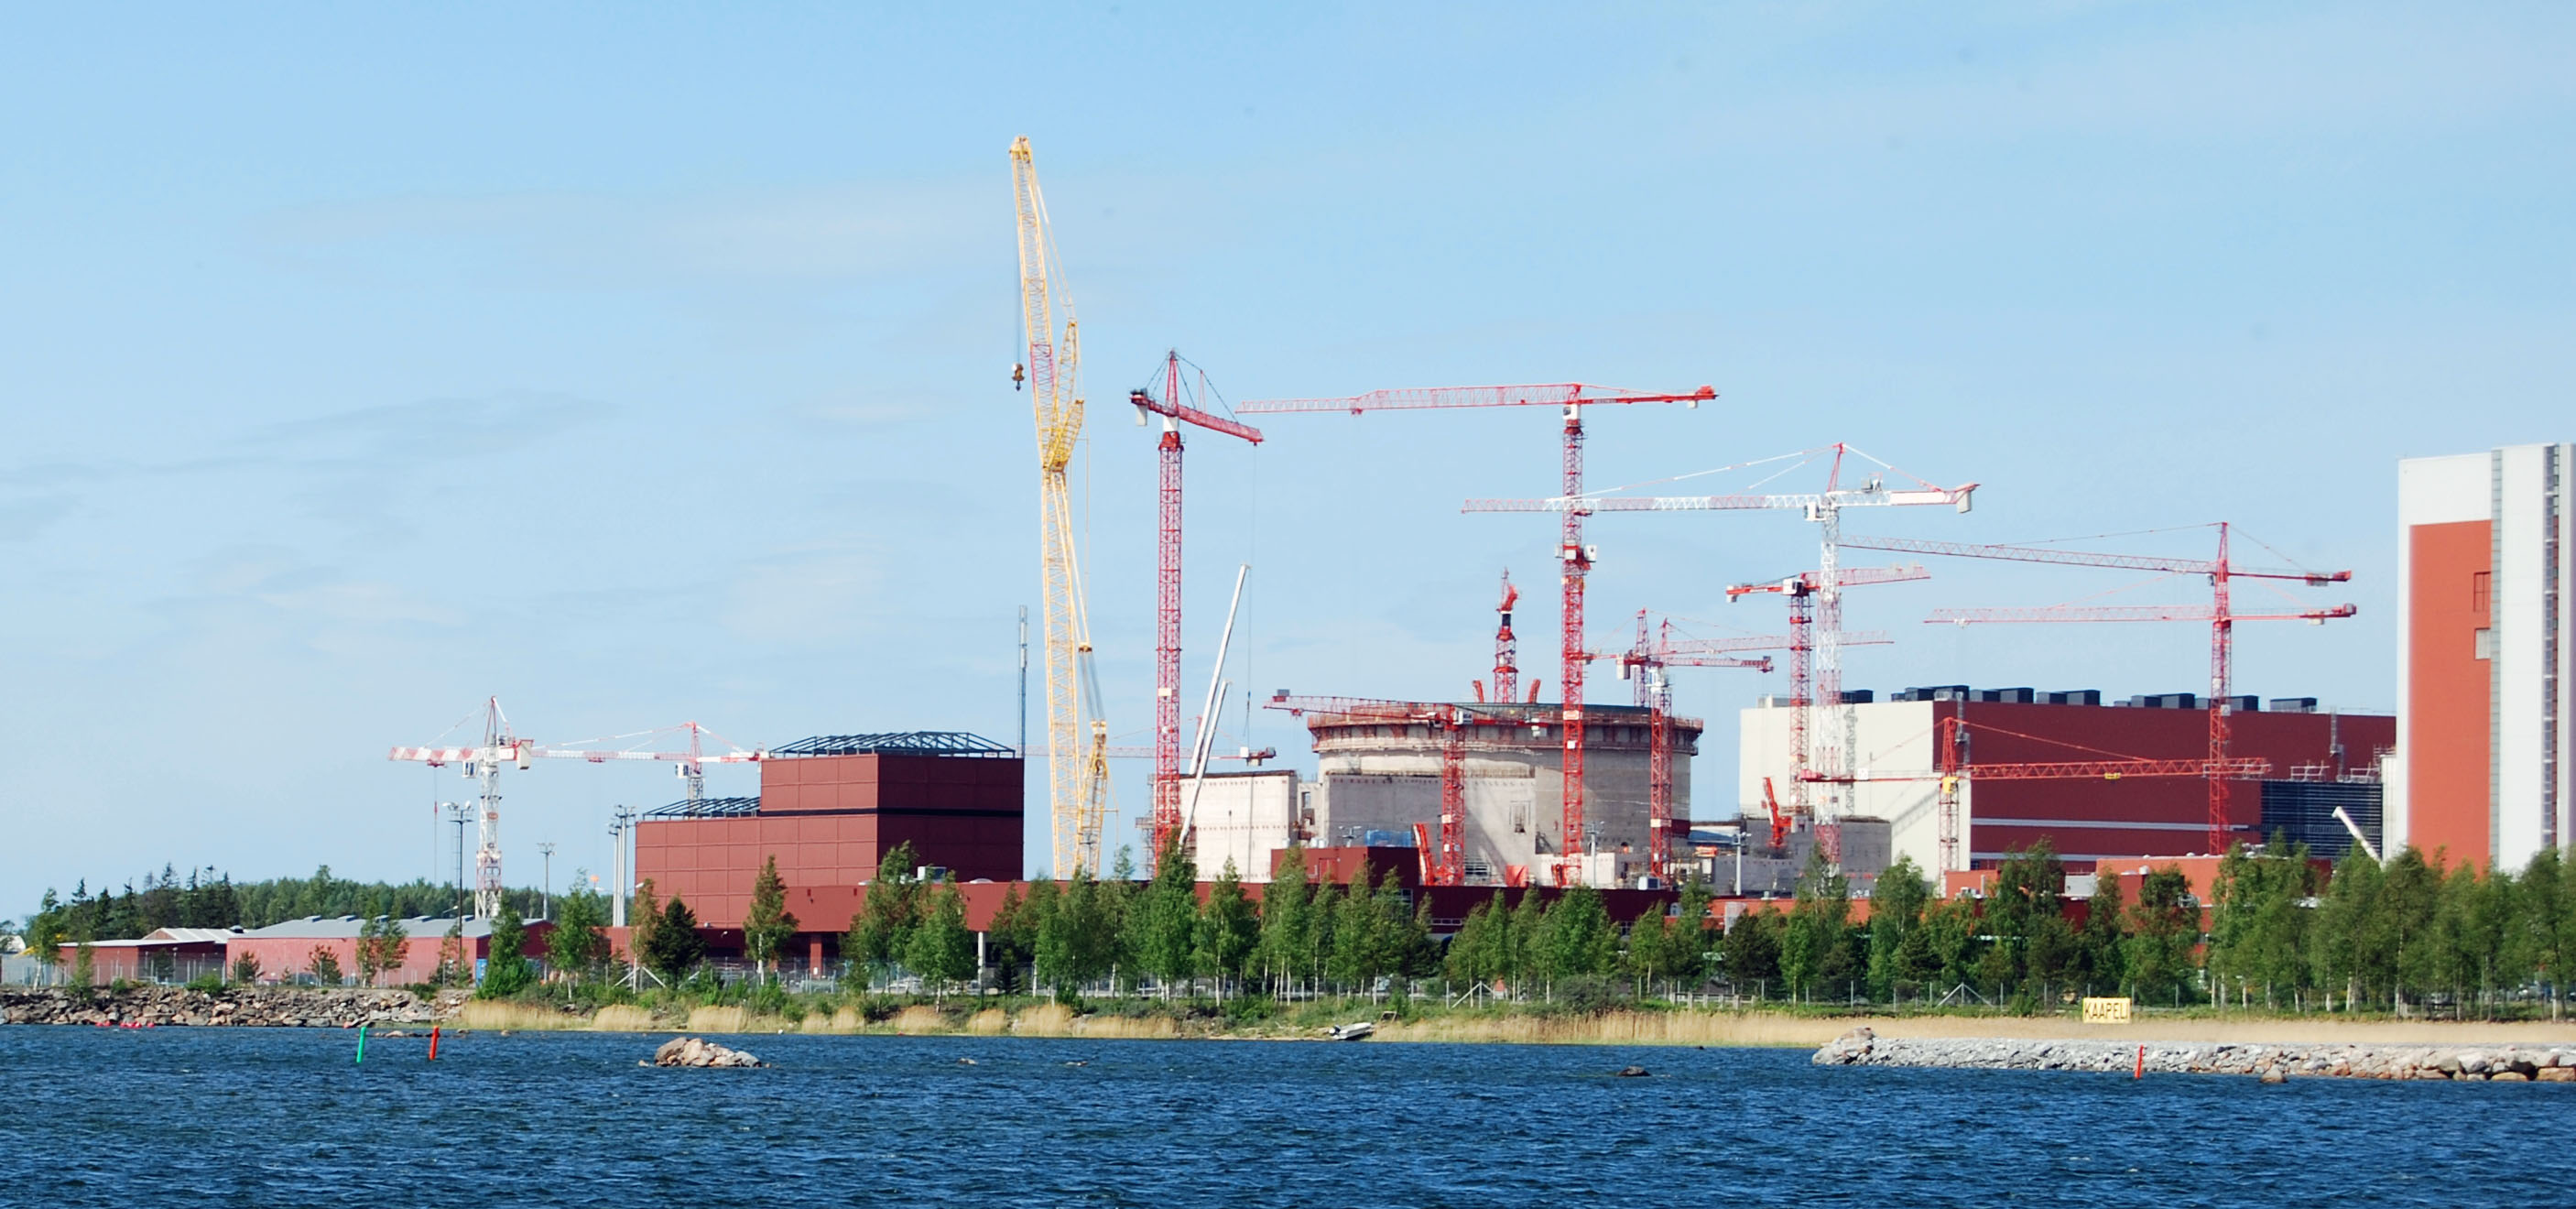 Olkiluoto-3 under construction in 2009, the first EPR to be built. It is scheduled to start electricity production in 2018, a delay of nine years. credit By kallerna - Own work, Public Domain, https://commons.wikimedia.org/w/index.php?curid=6954379